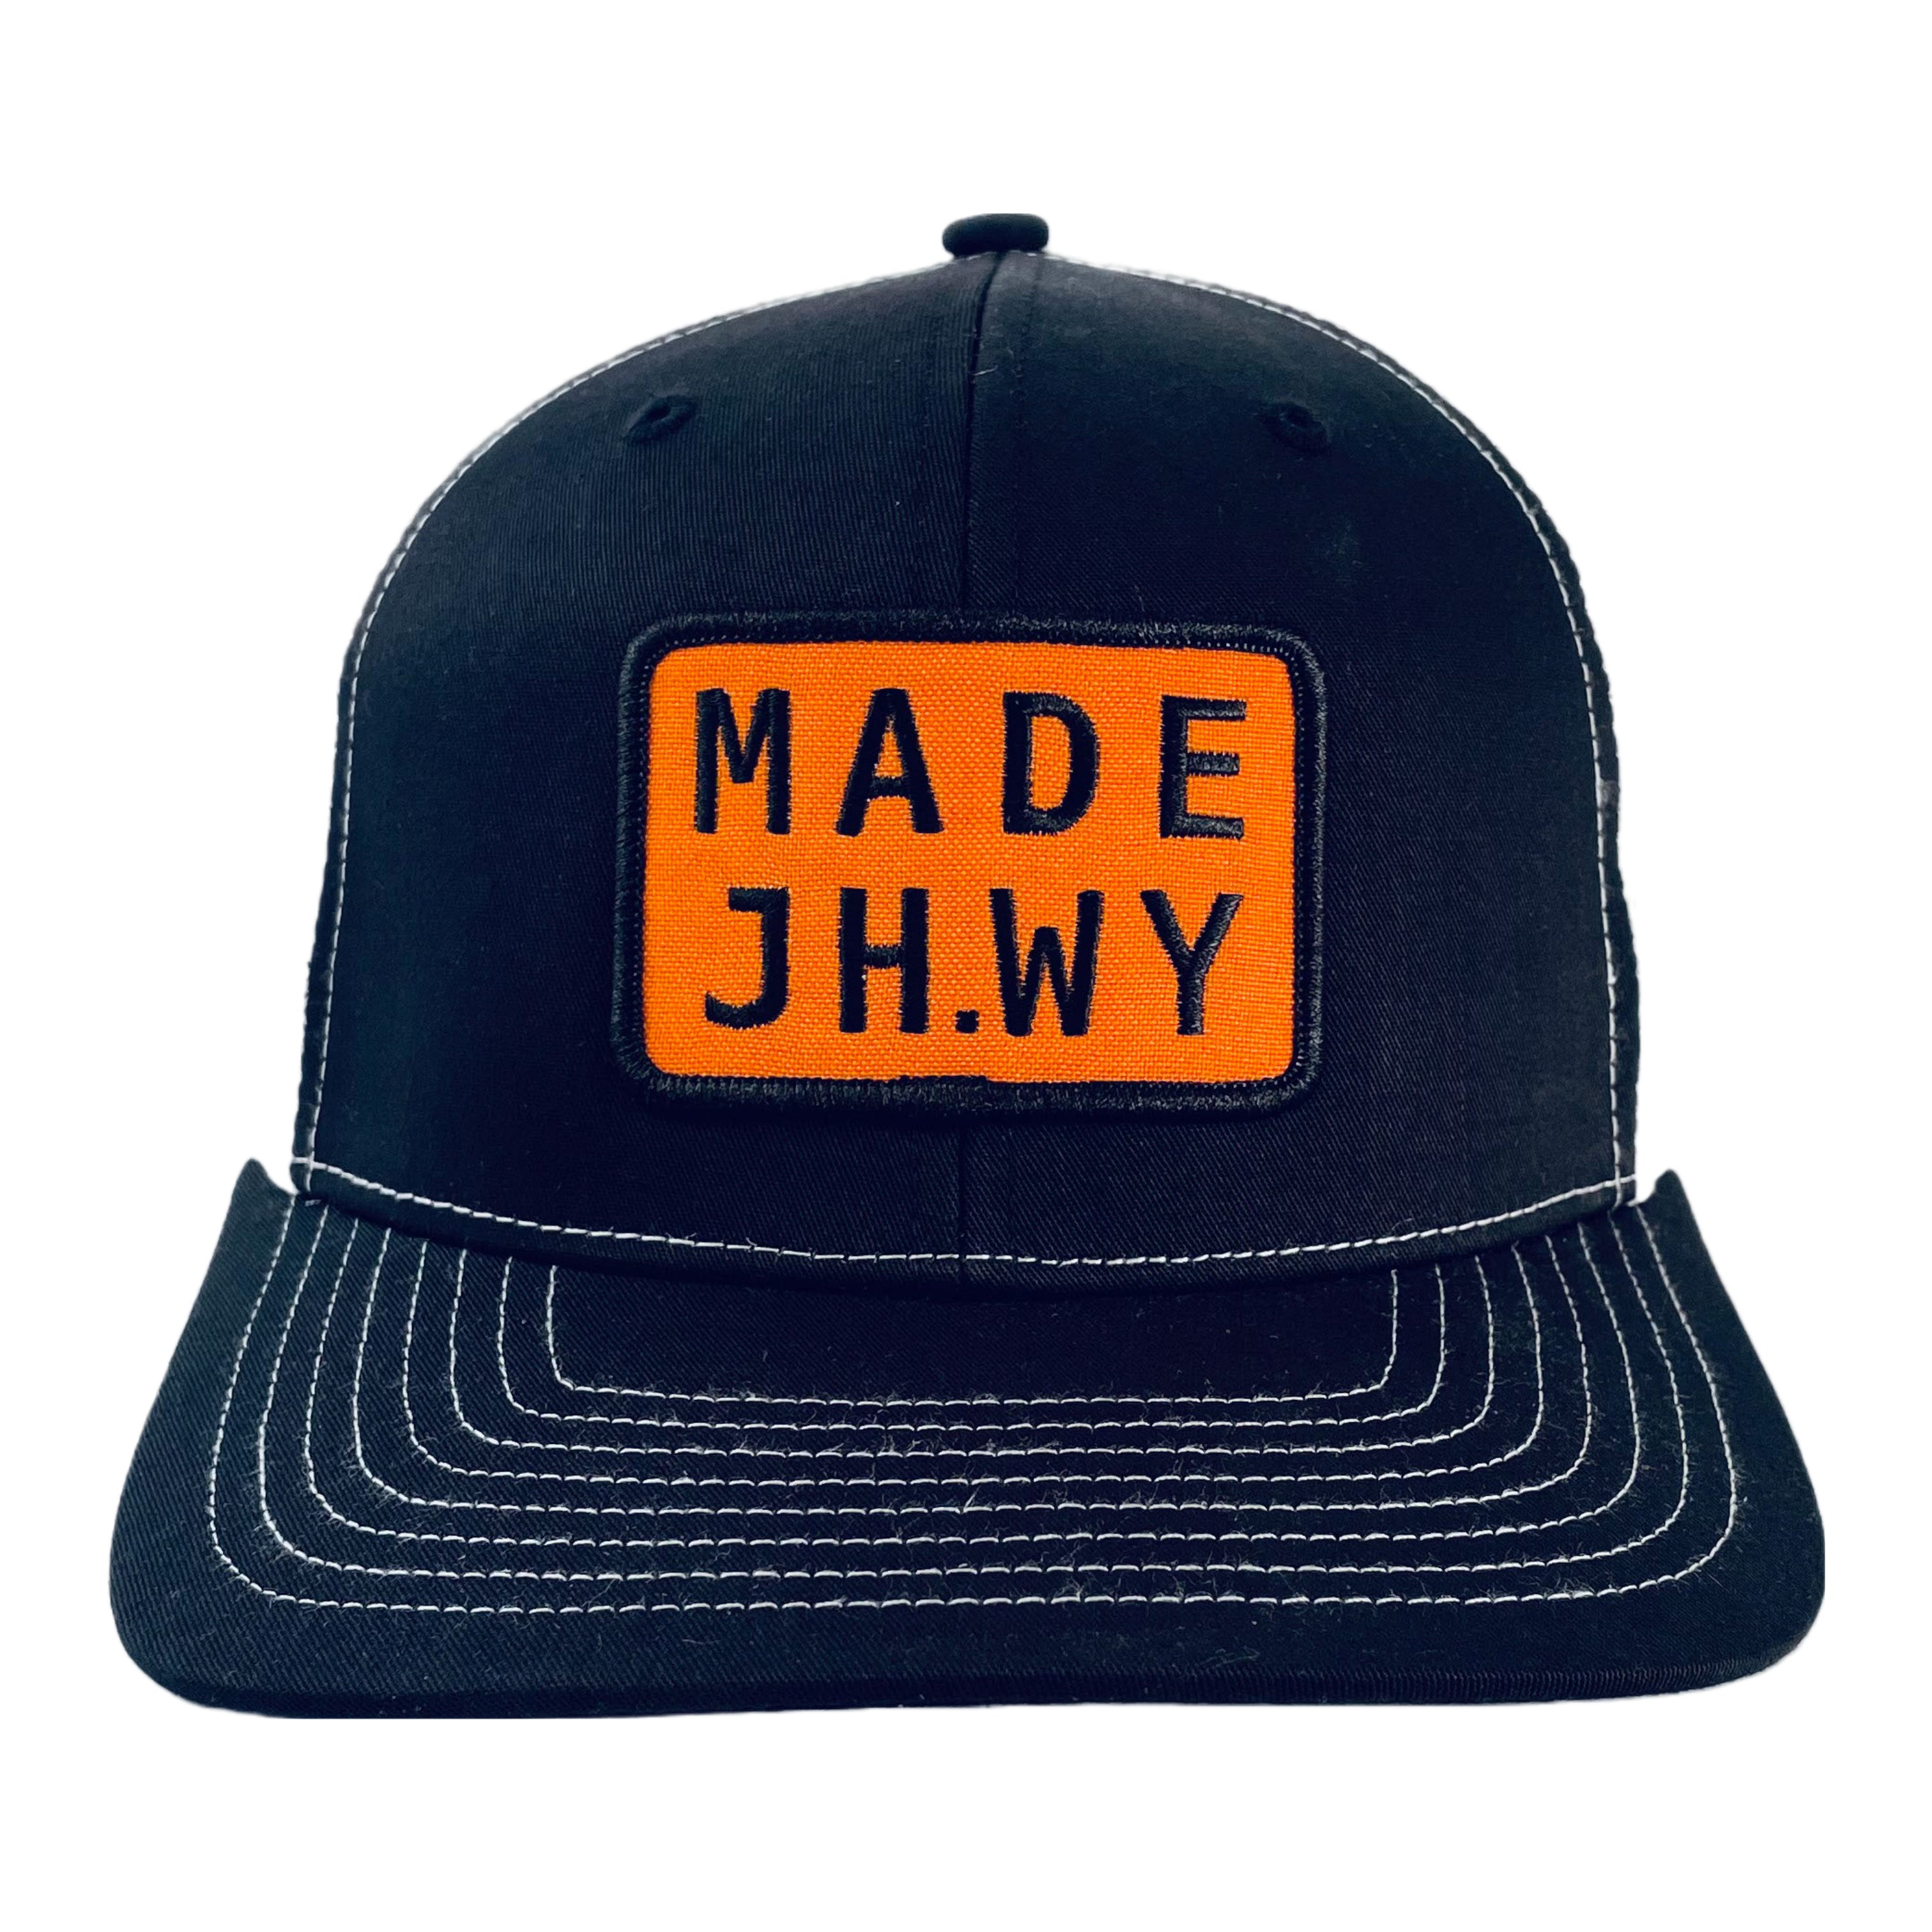 Black and White Mesh MADE JH.WY Trucker Hat